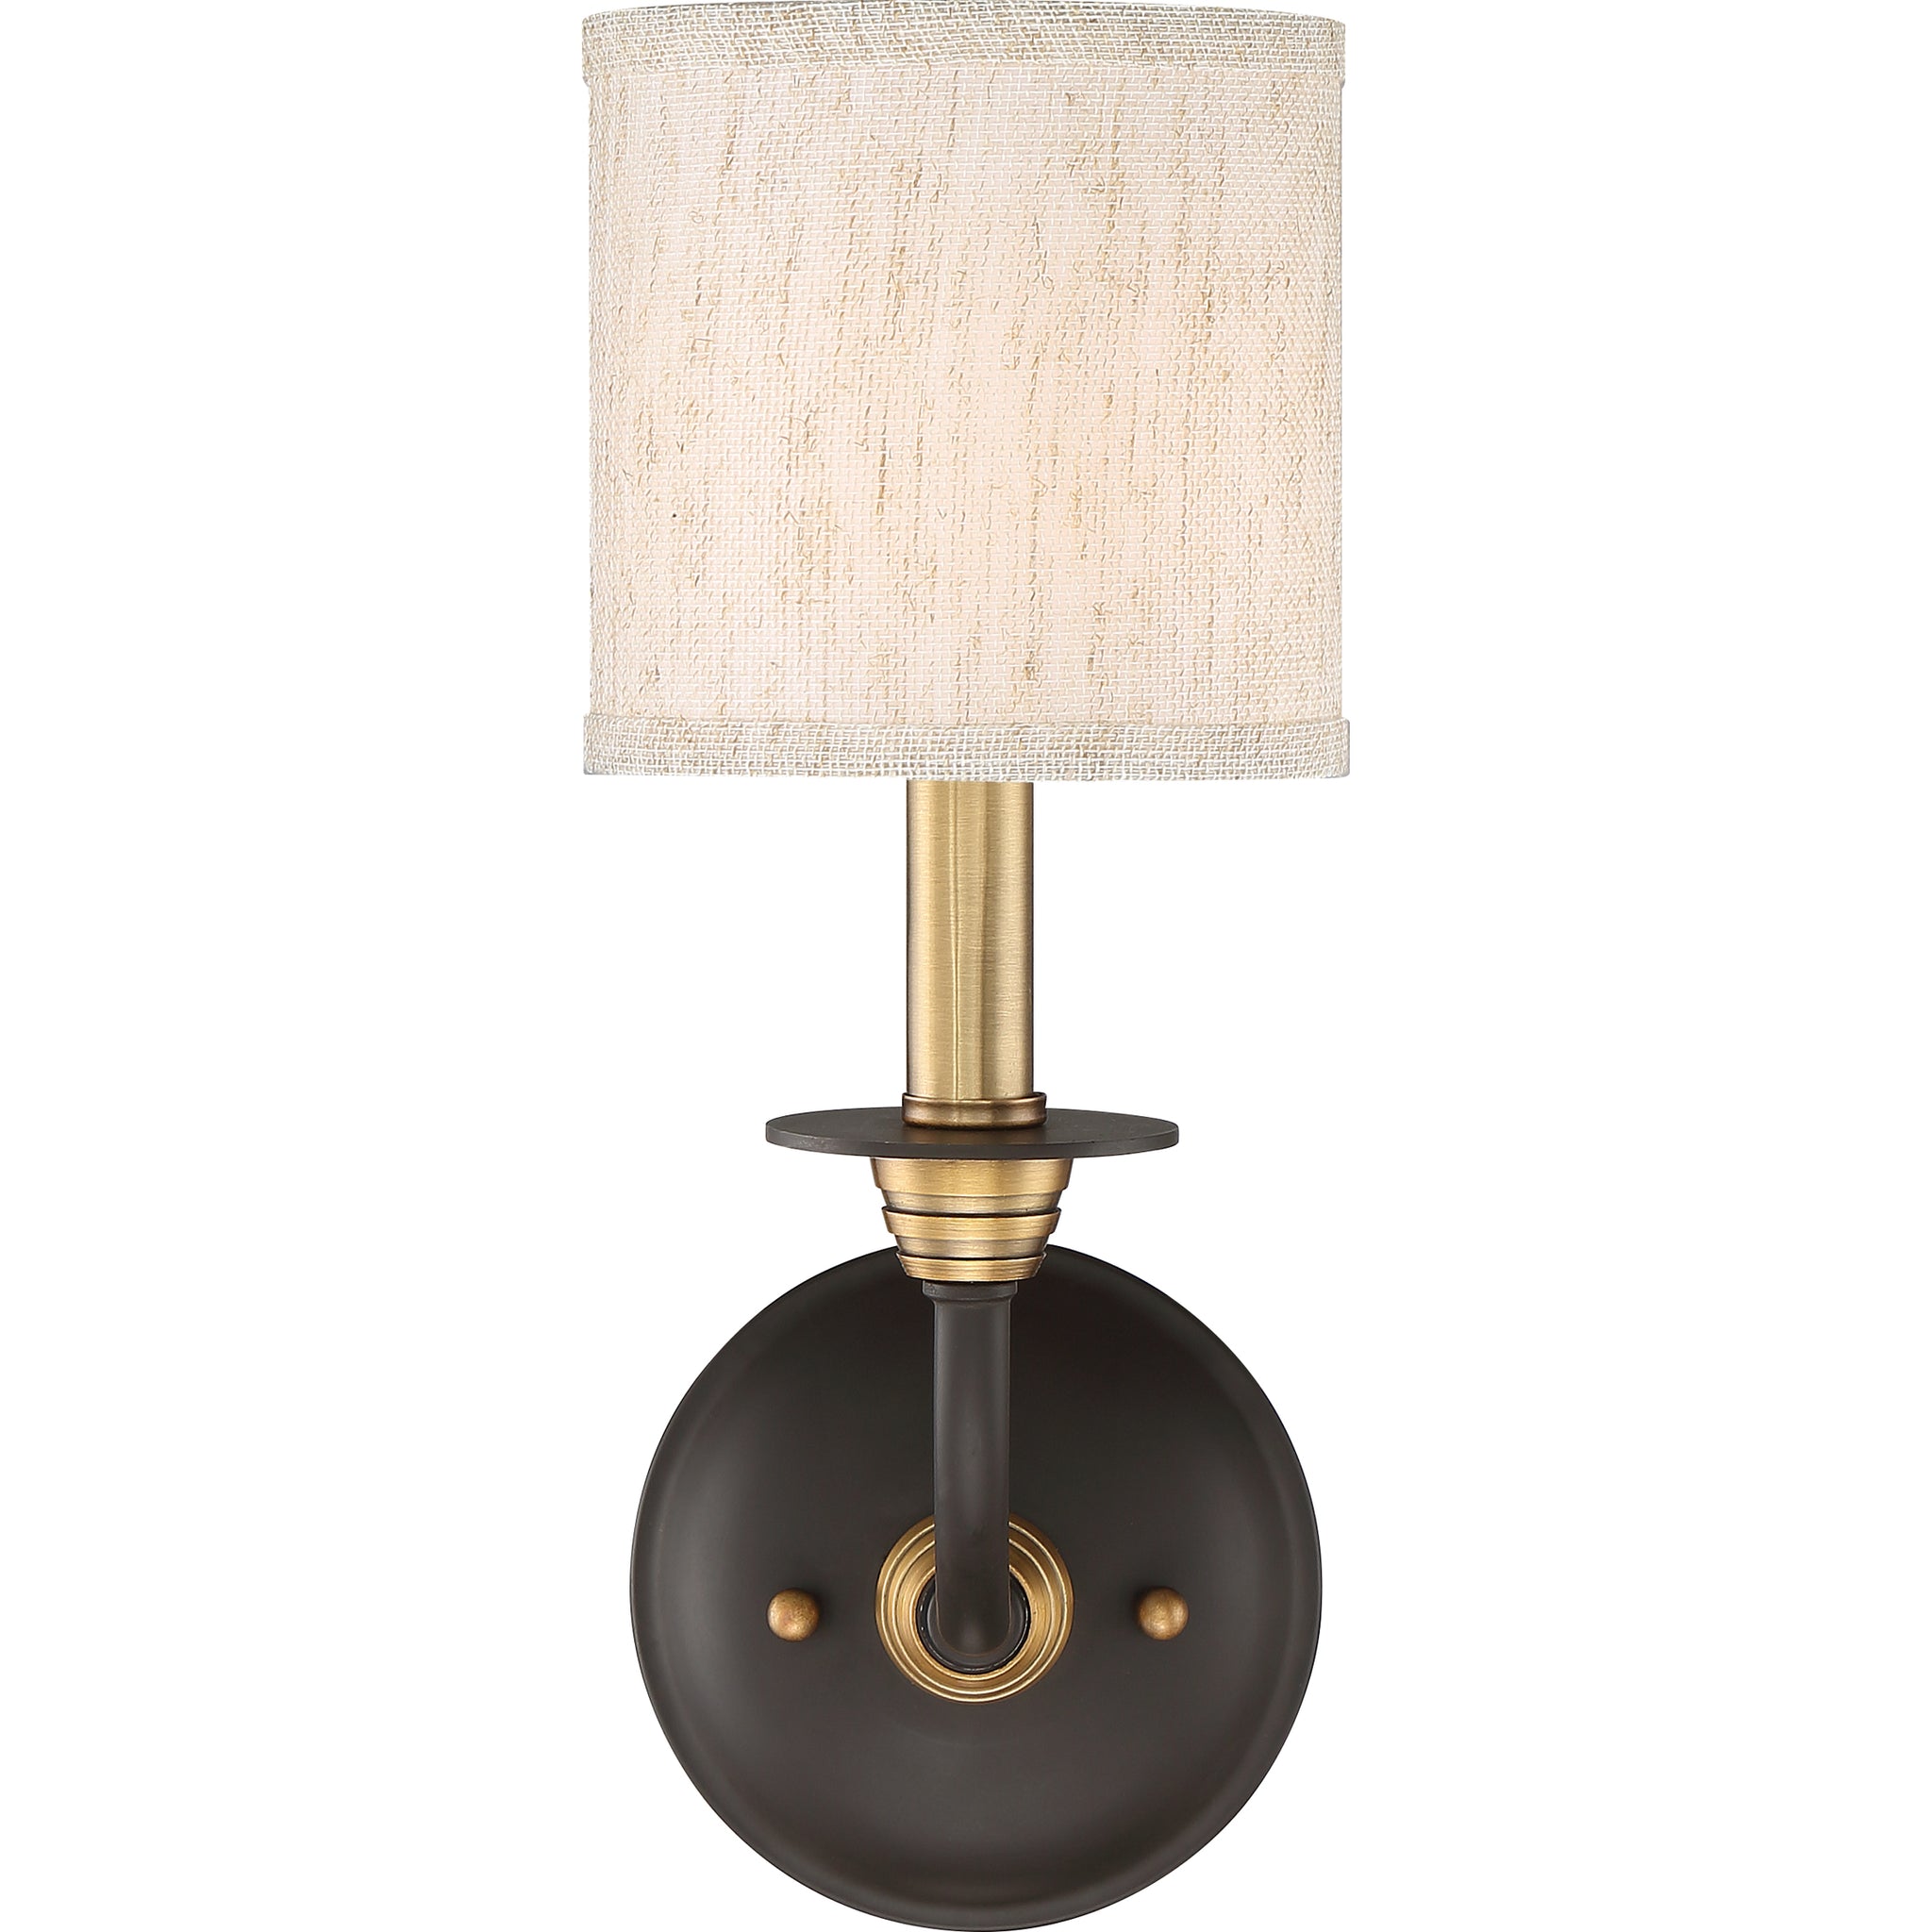 Audley Sconce Old Bronze